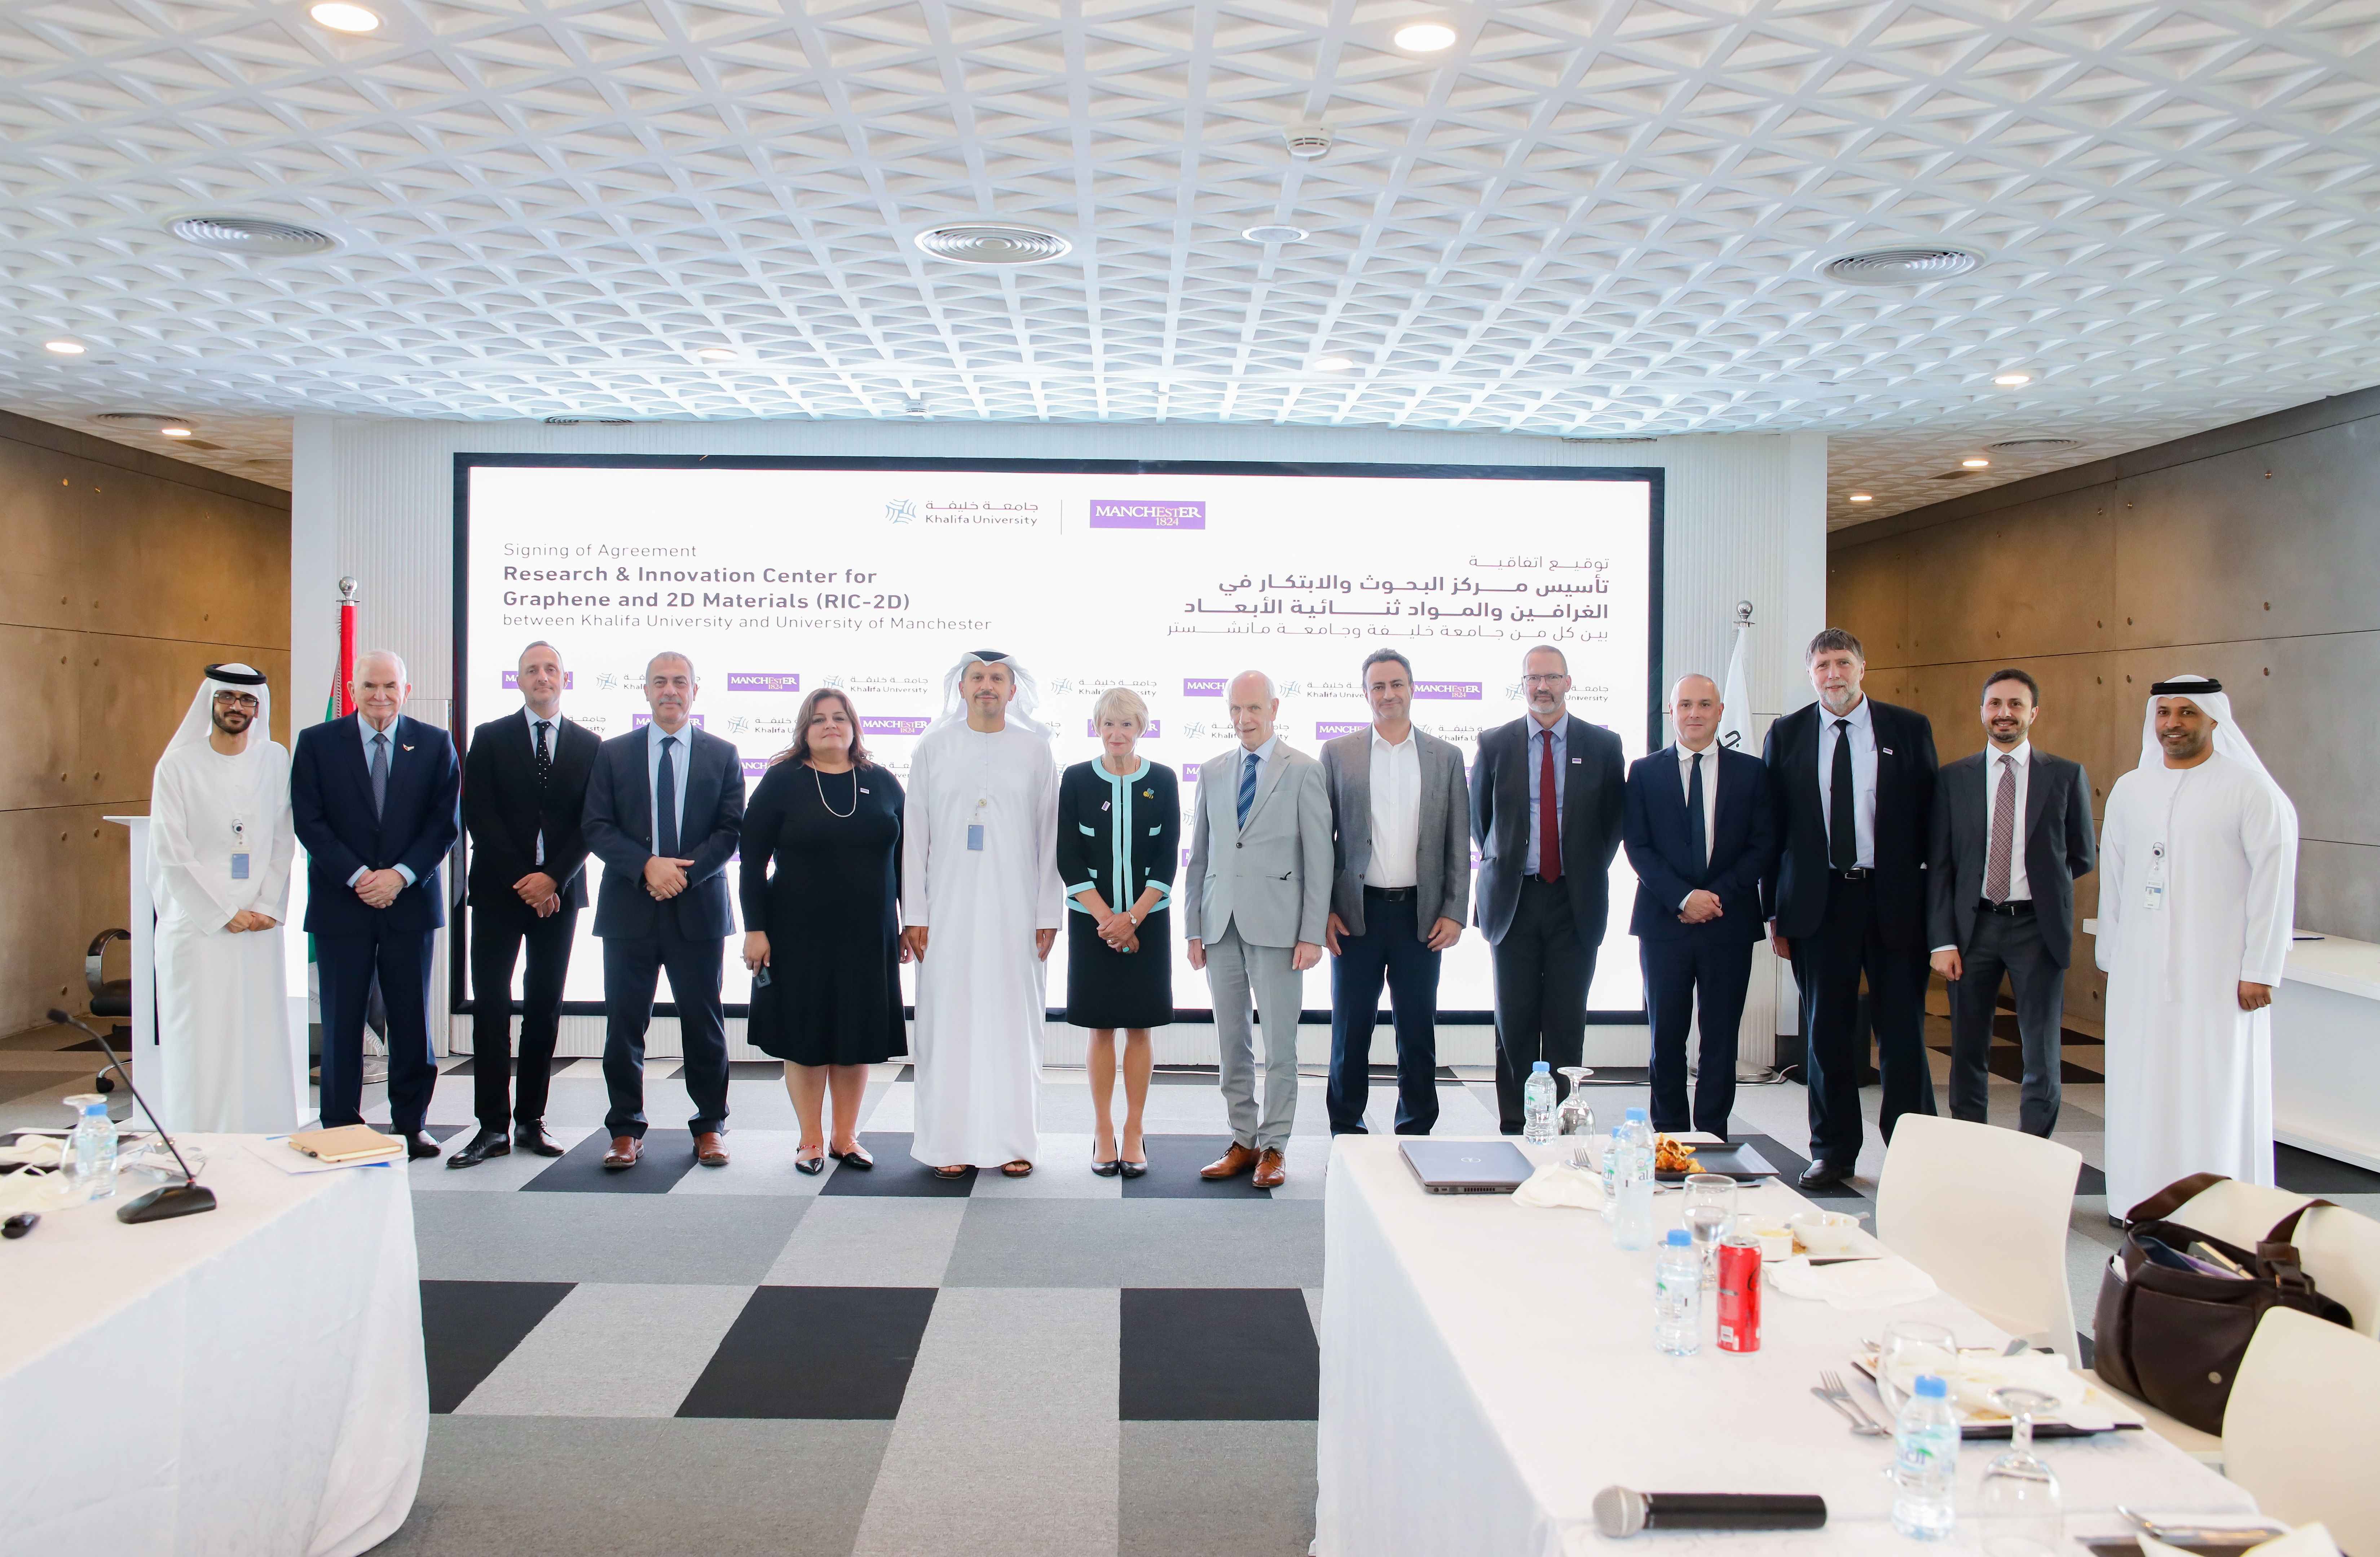 Khalifa University and Manchester University Collaborate To Fund Mutual Research In Graphene Innovation